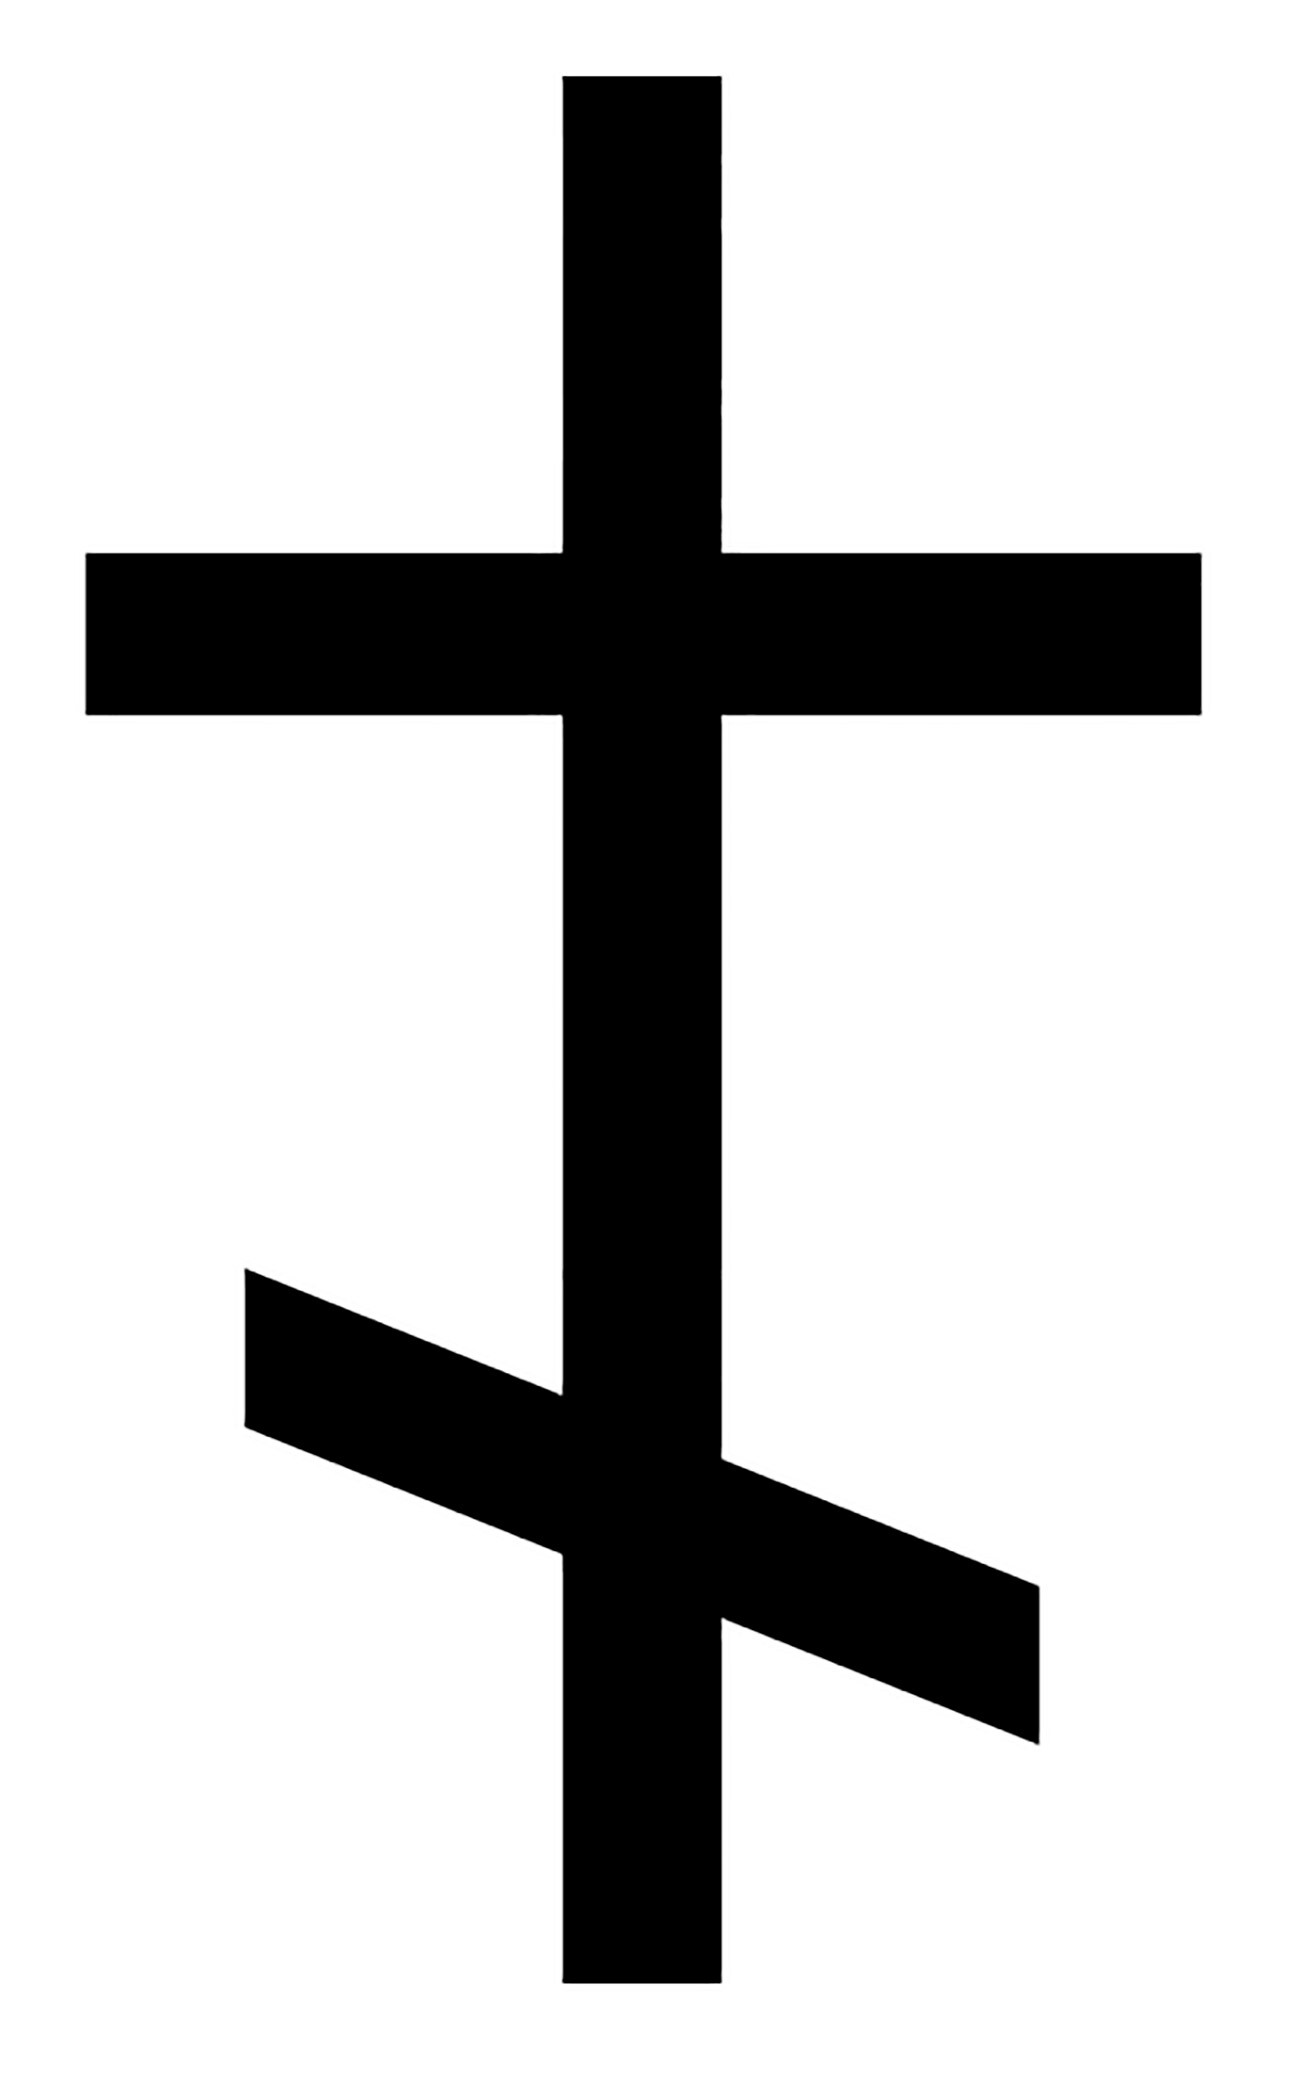 eastern orthodox - What is the meaning of the three letters in the halo of  the Acheiropoieta? - Christianity Stack Exchange